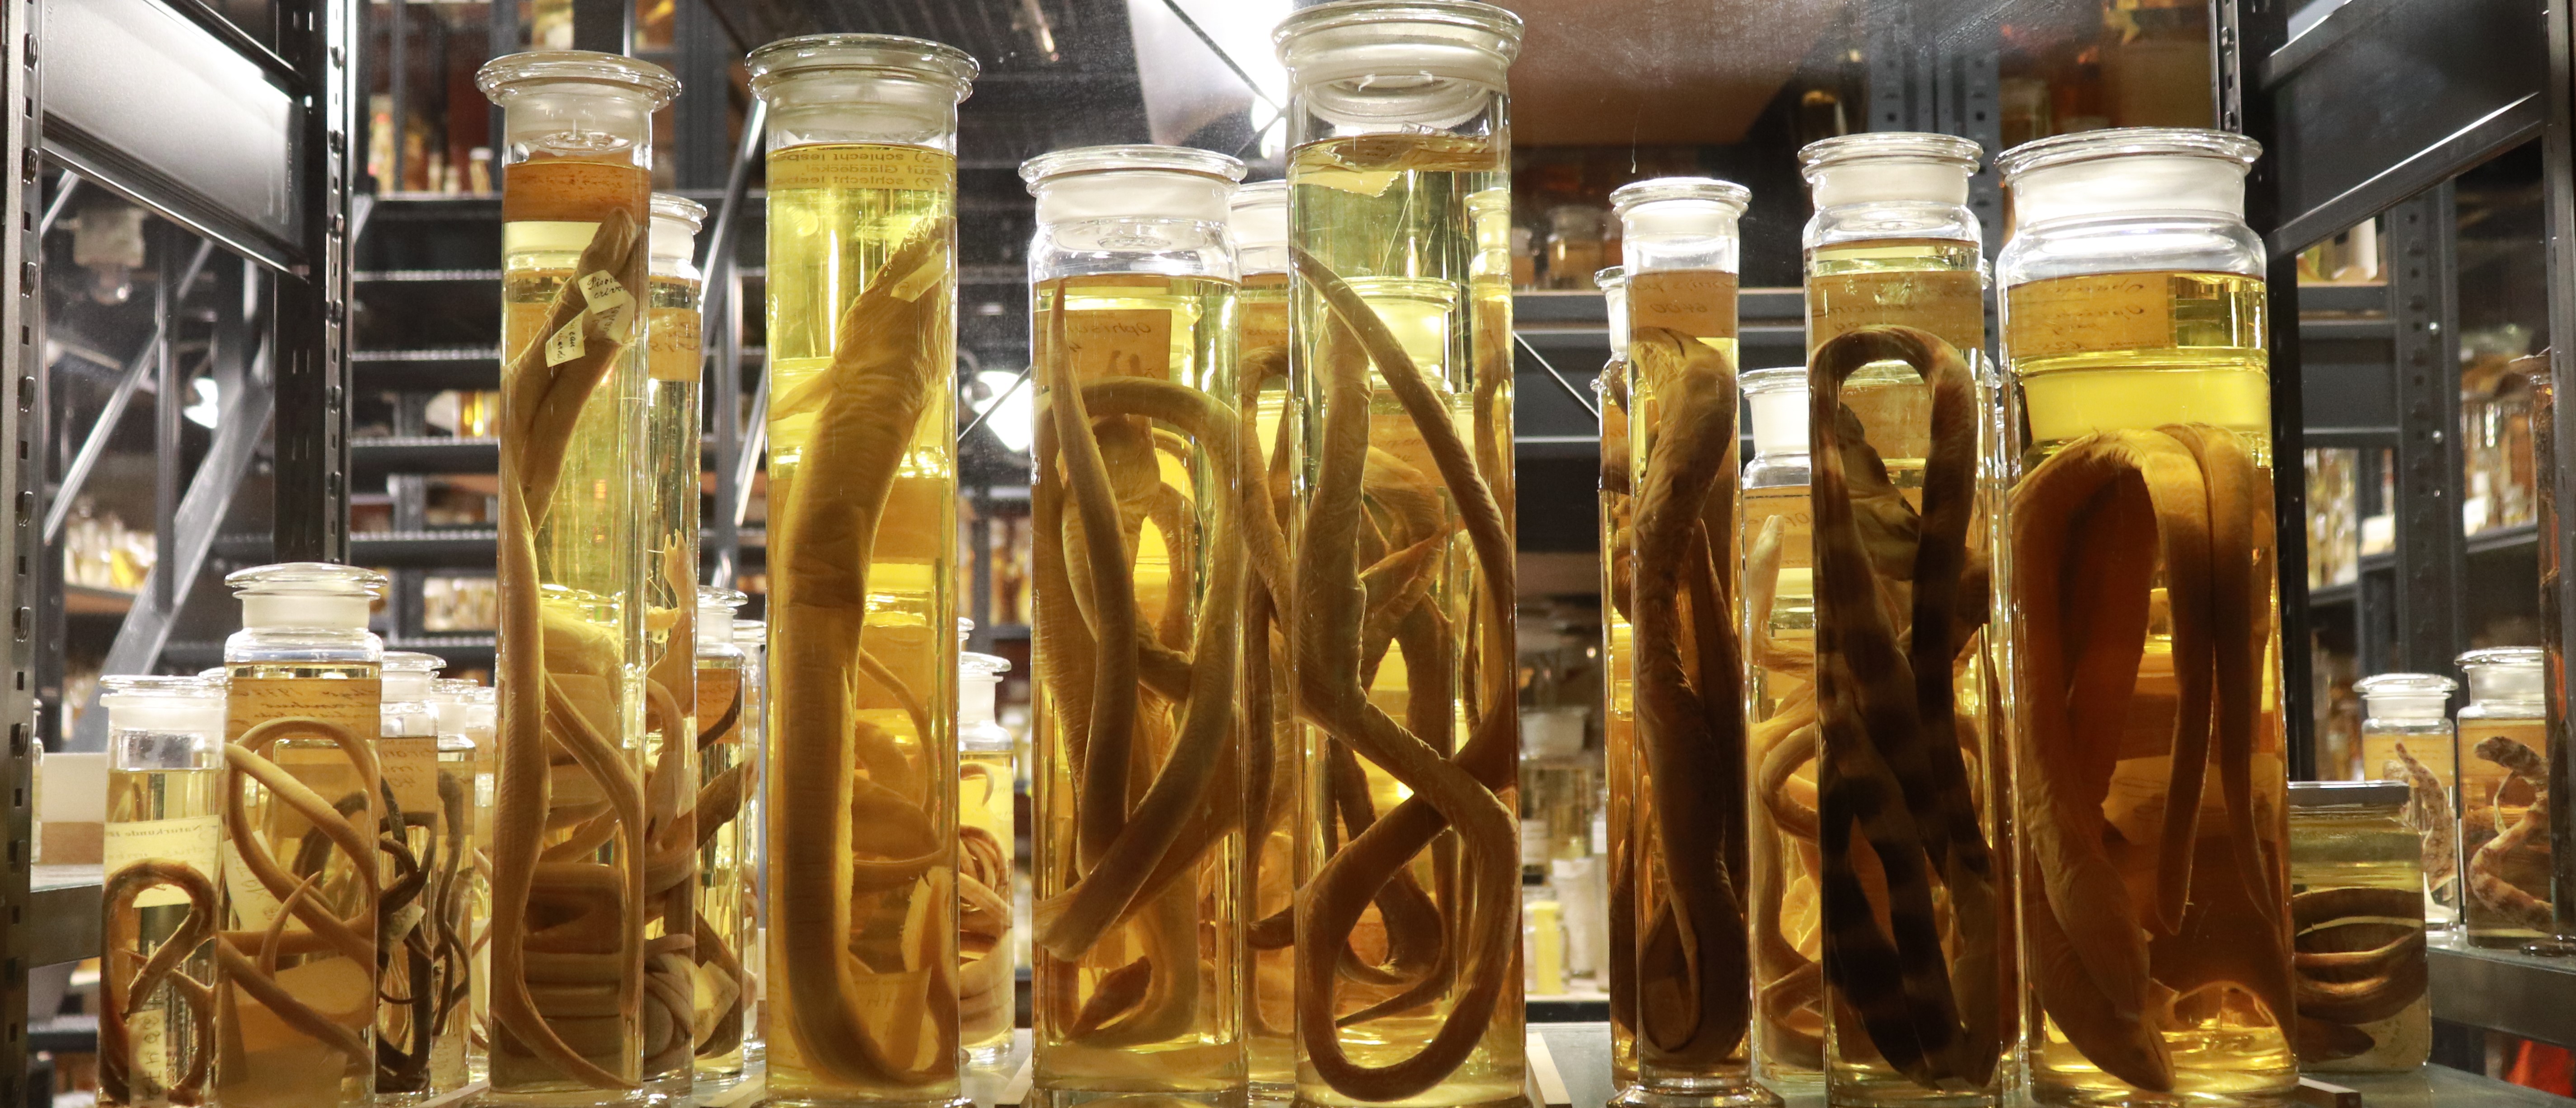 Animals preserved in formaldehyde at the Museum of Natural History in Berlin, Germany  